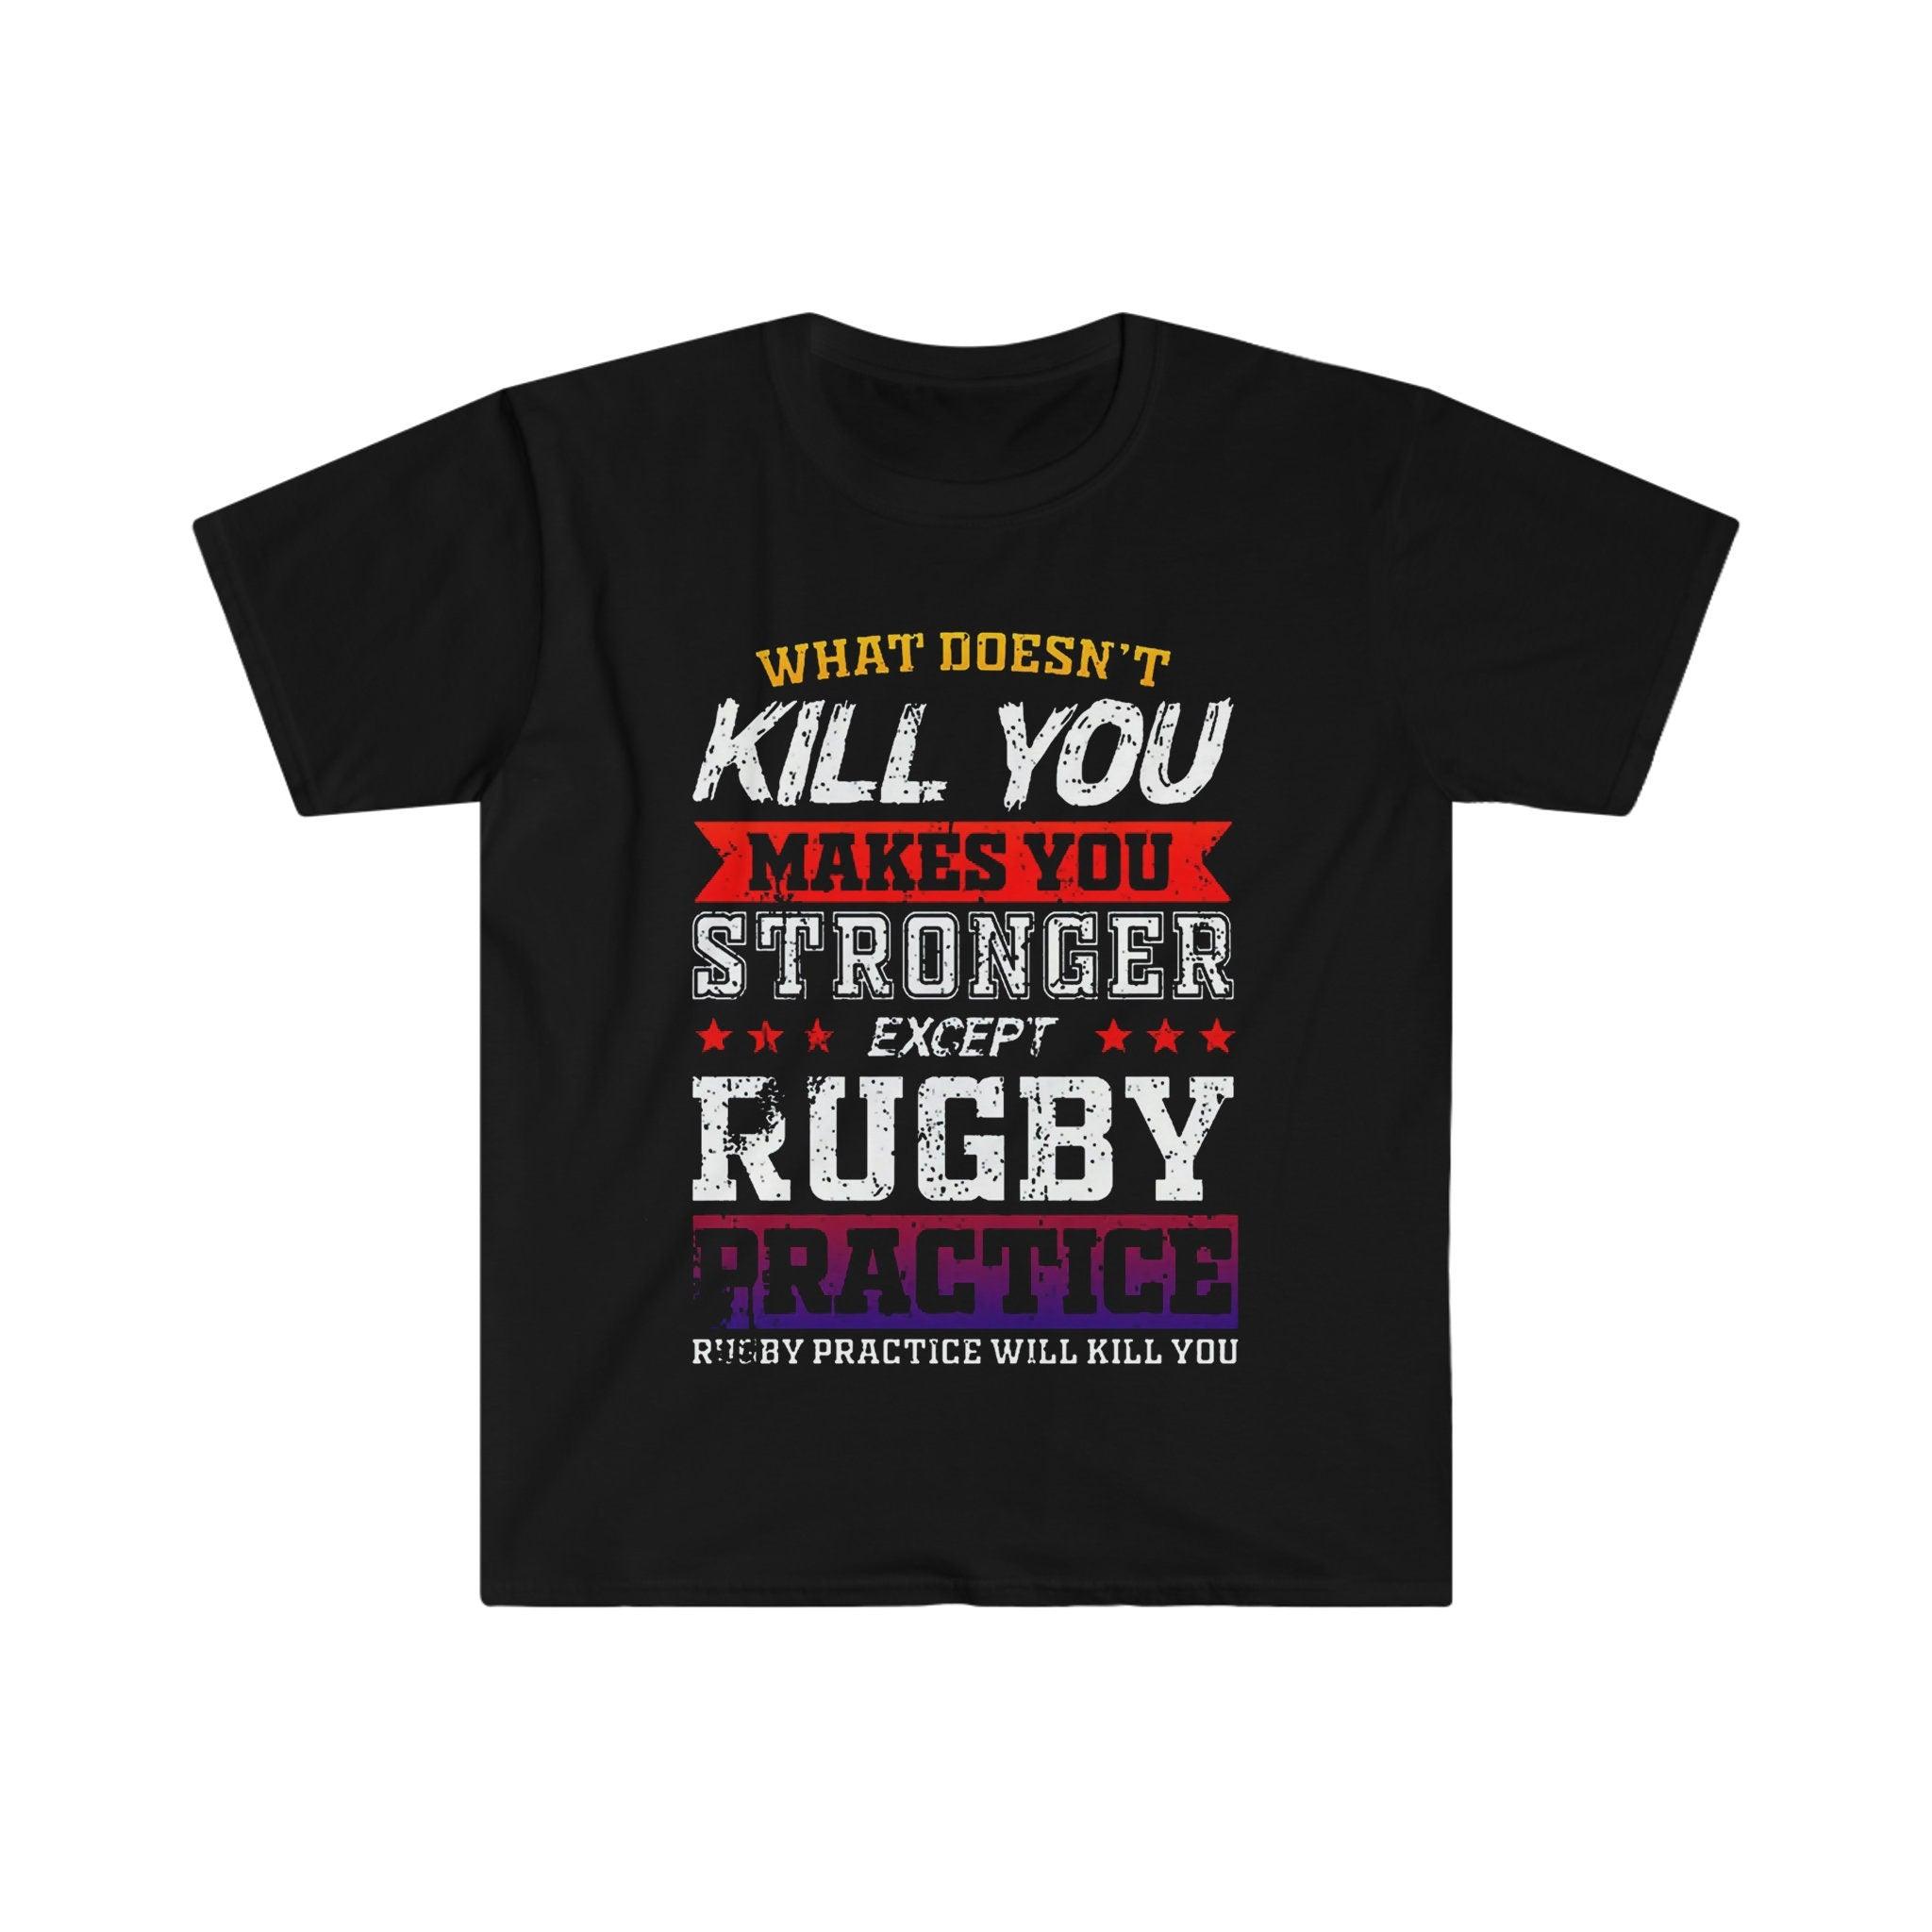 What Doesn't Kill You Makes Strong Except Rugby Practice, Rugby Practice Will Kill You T-Shirts - plusminusco.com